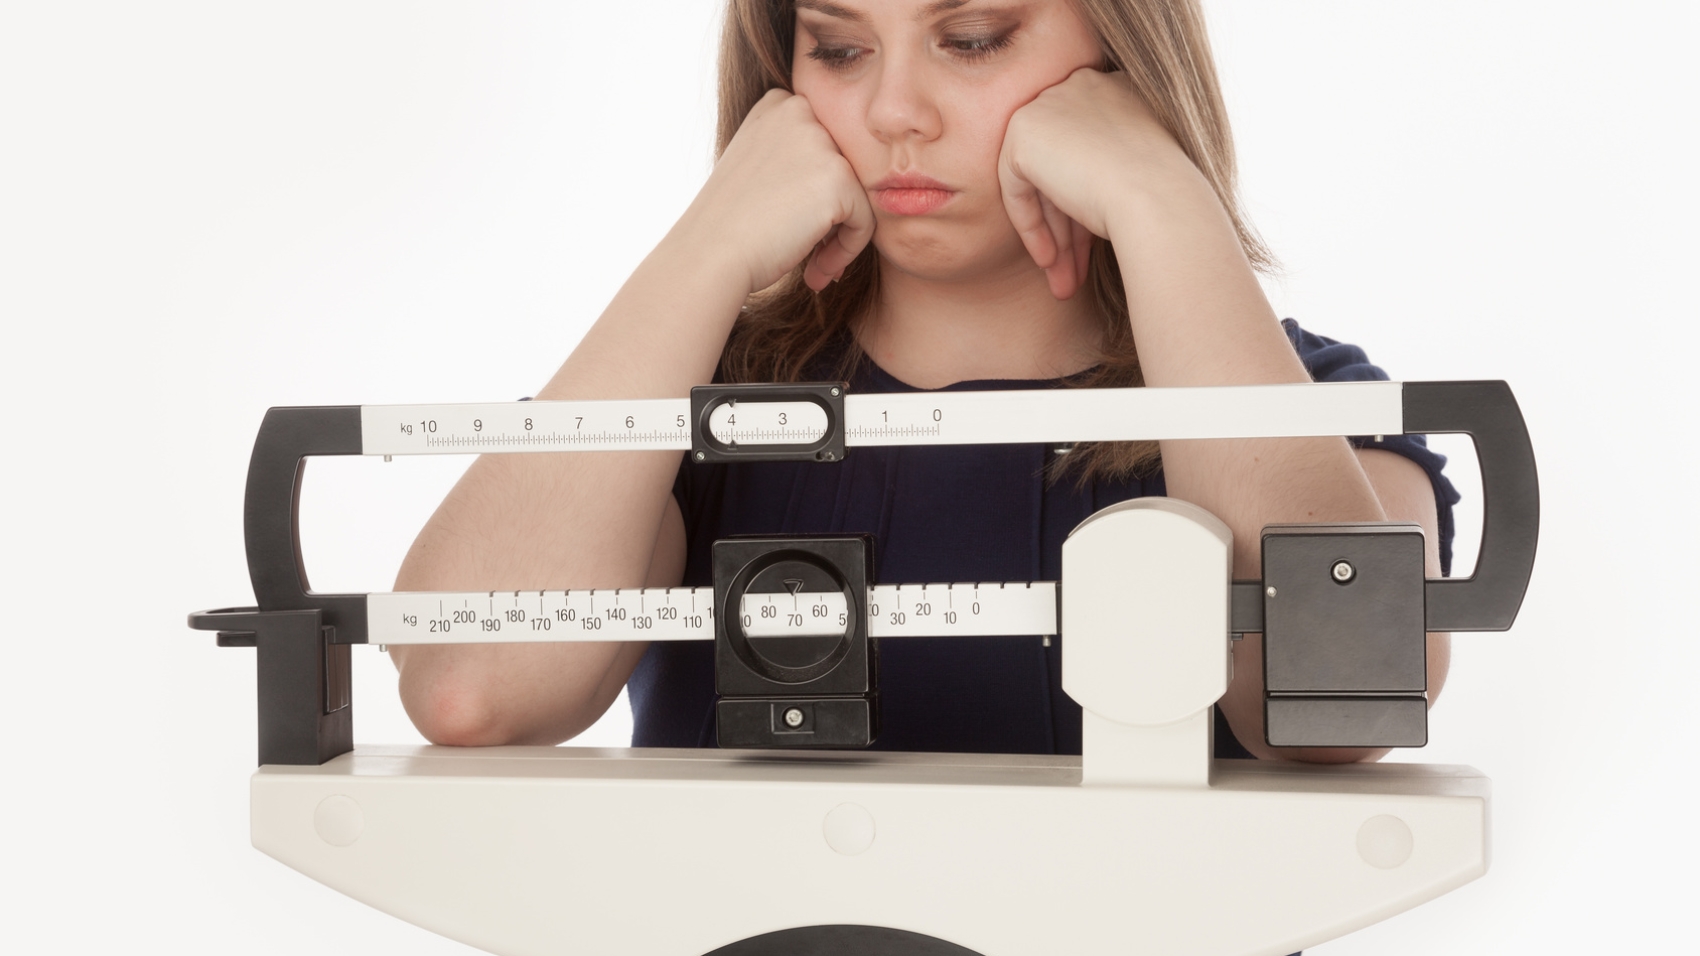 Young woman dissapointed on a medical weight scale.